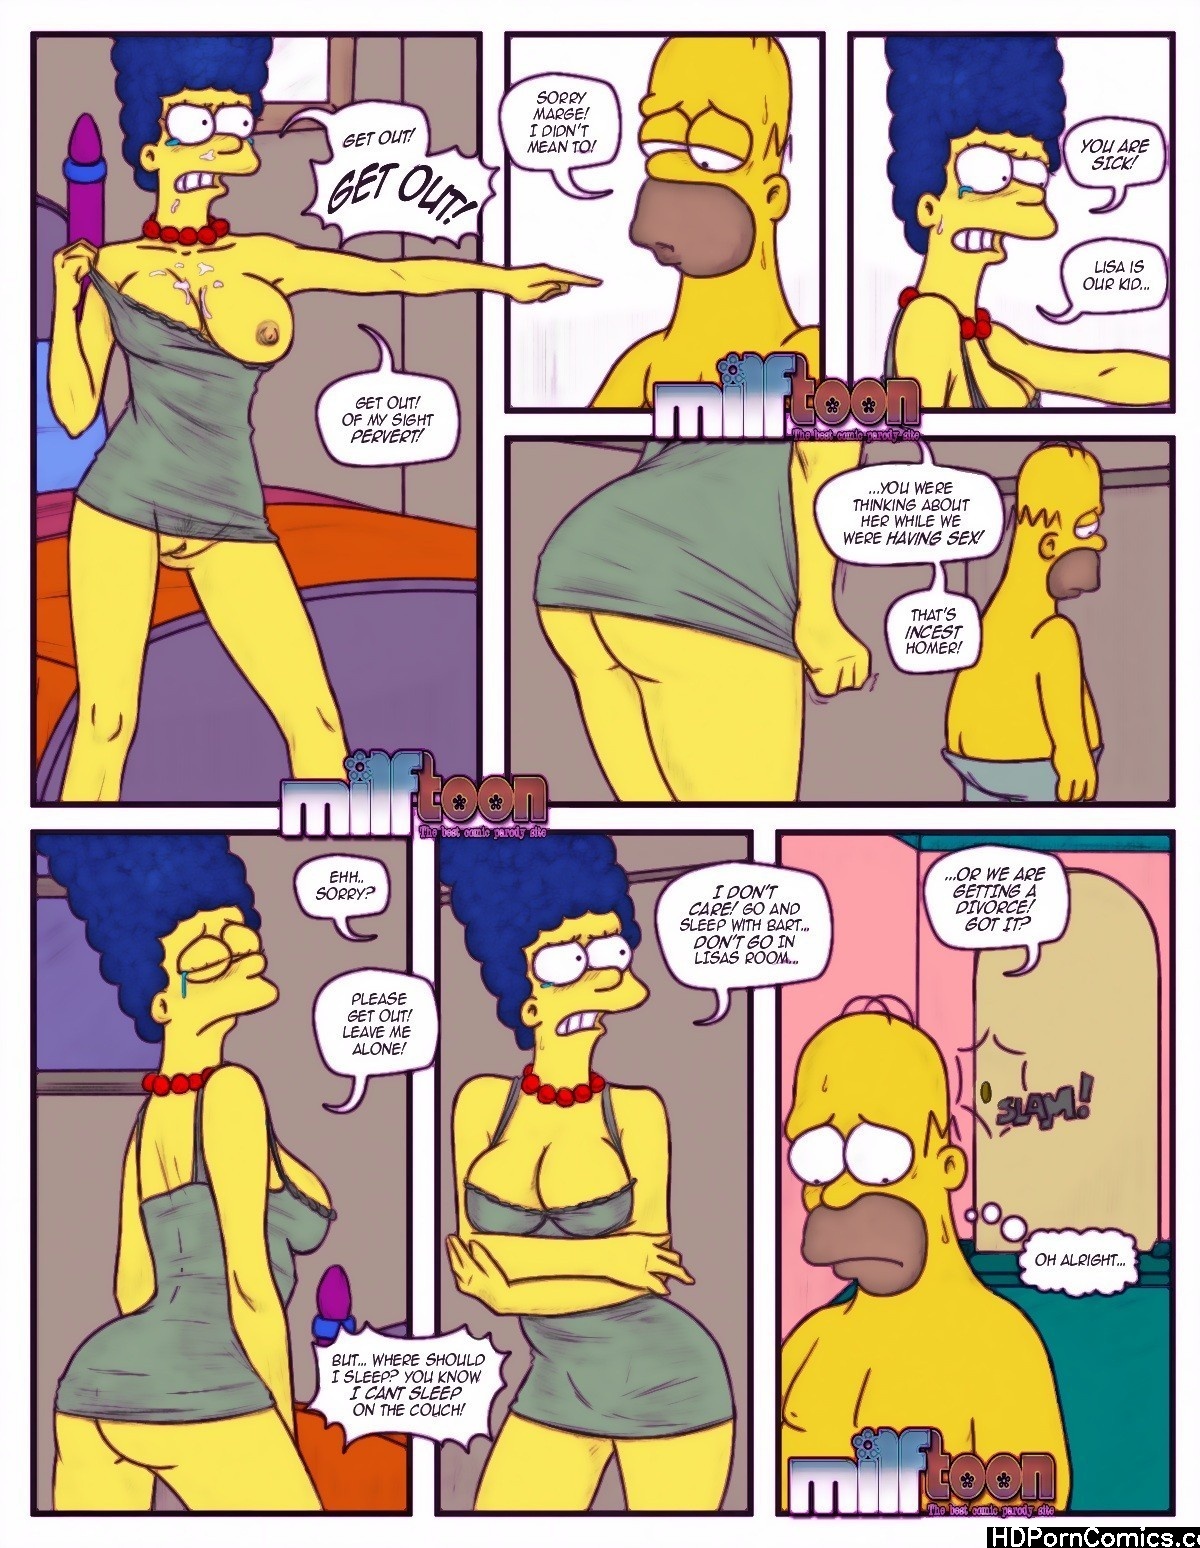 Simpsons Sex Comics - The Simpsons - Issue 1 Milftoons Sex Comic - HD Porn Comix